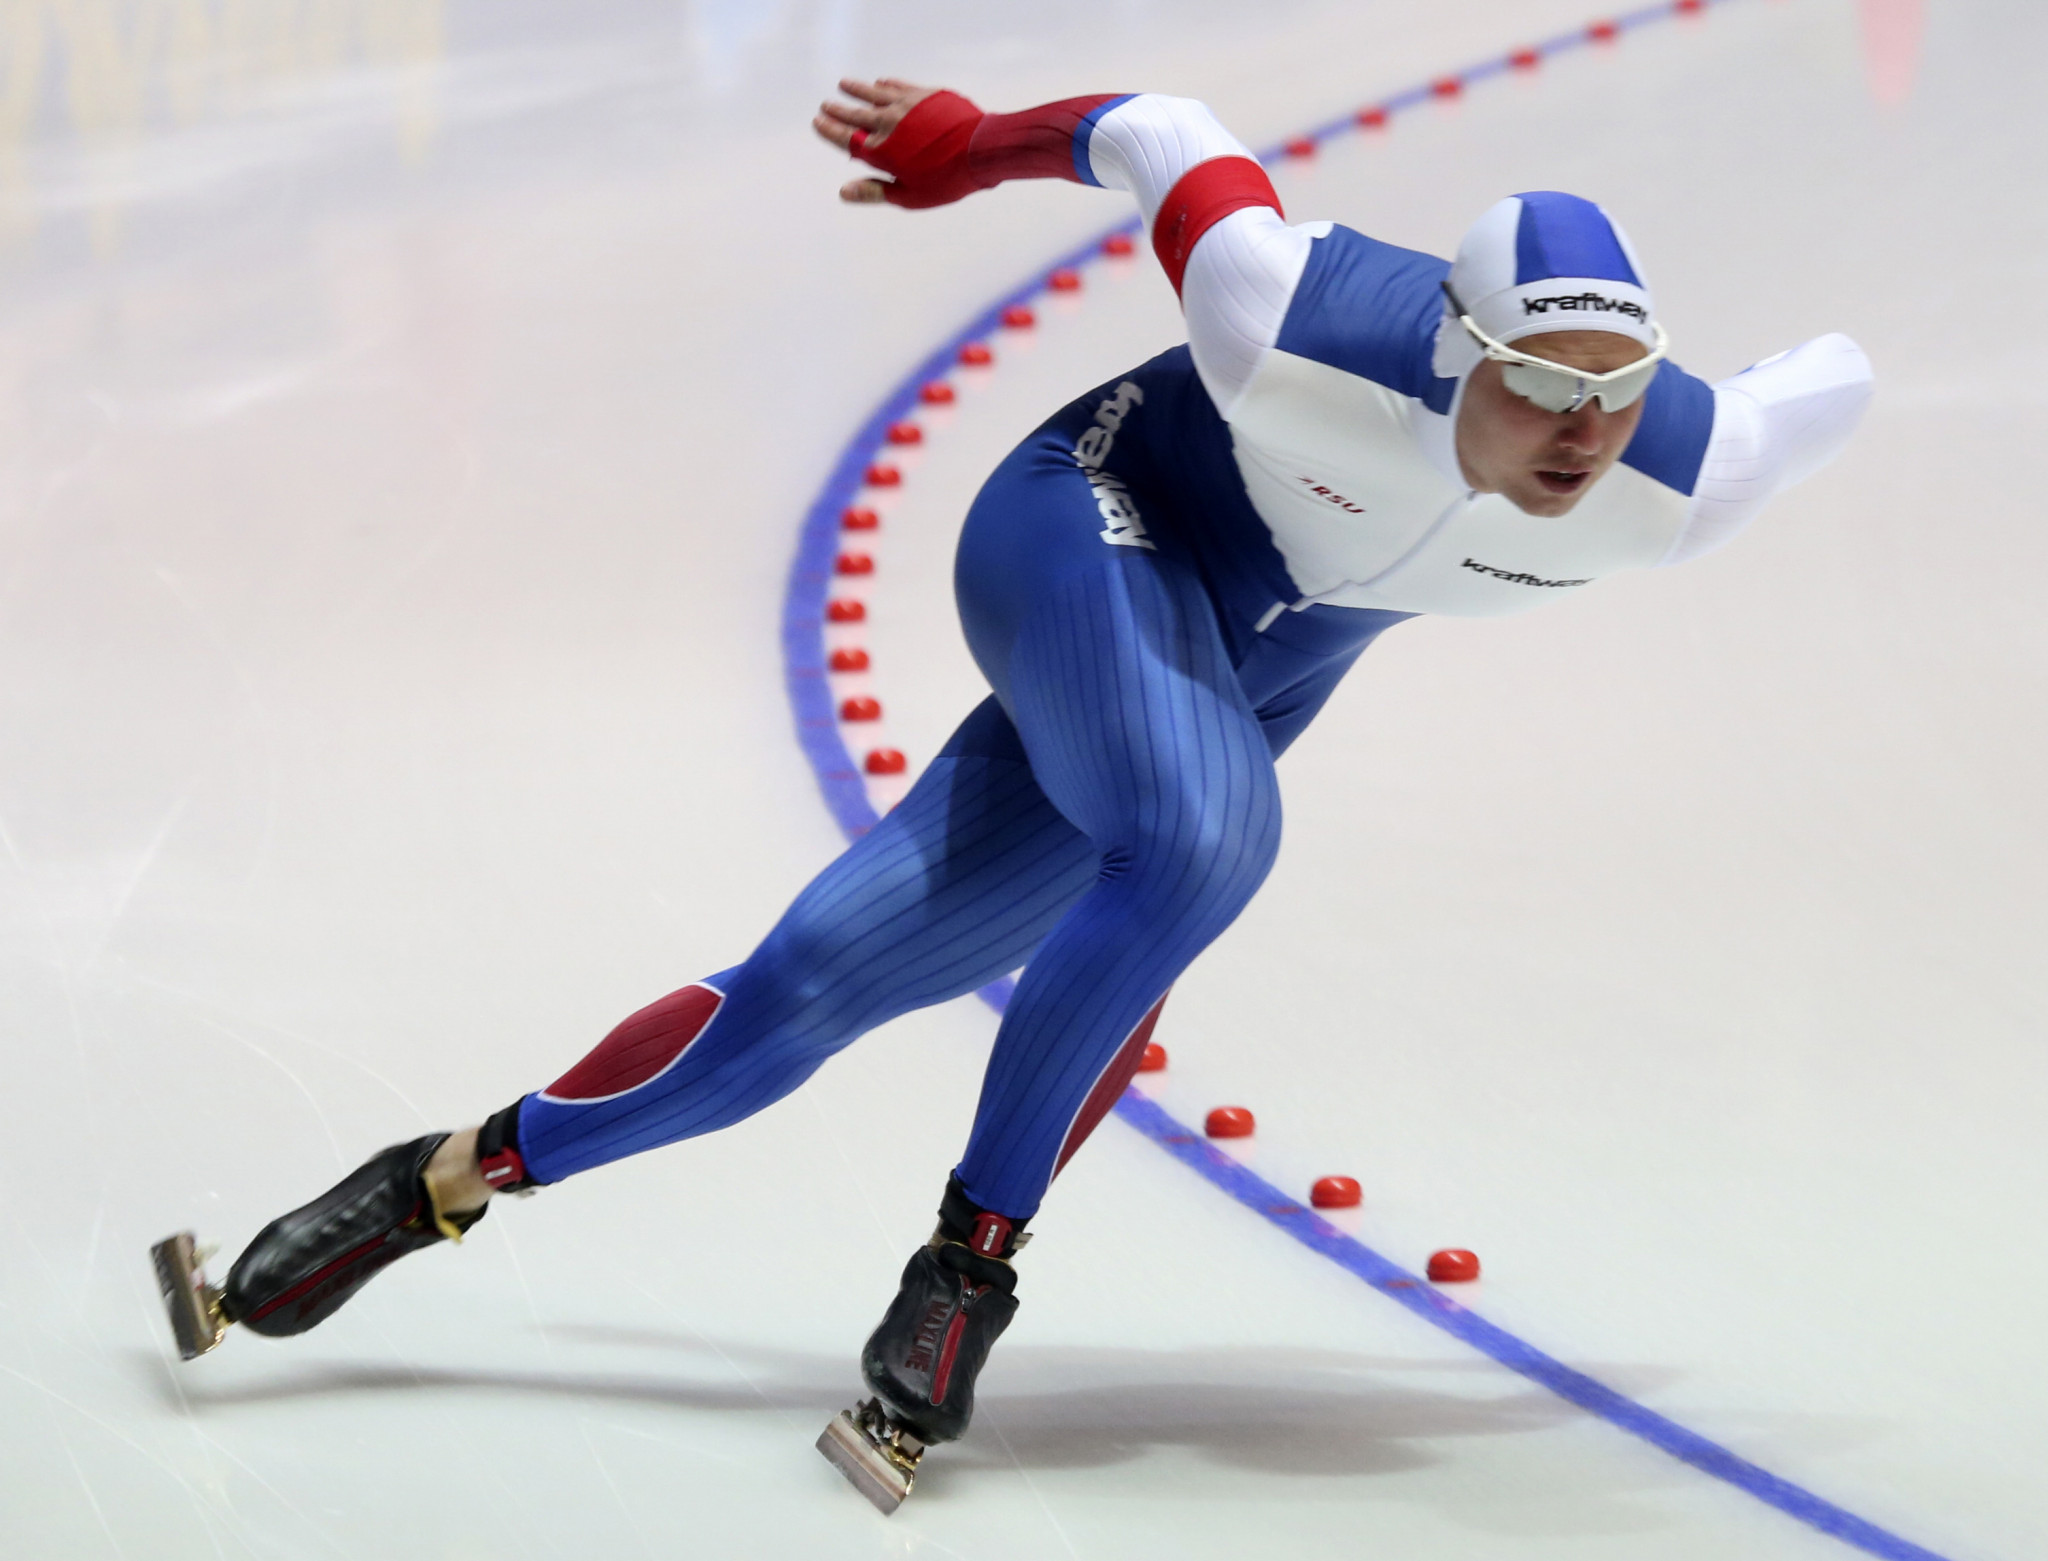 Bowe wins second gold of ISU Speed Skating World Cup in Hamar